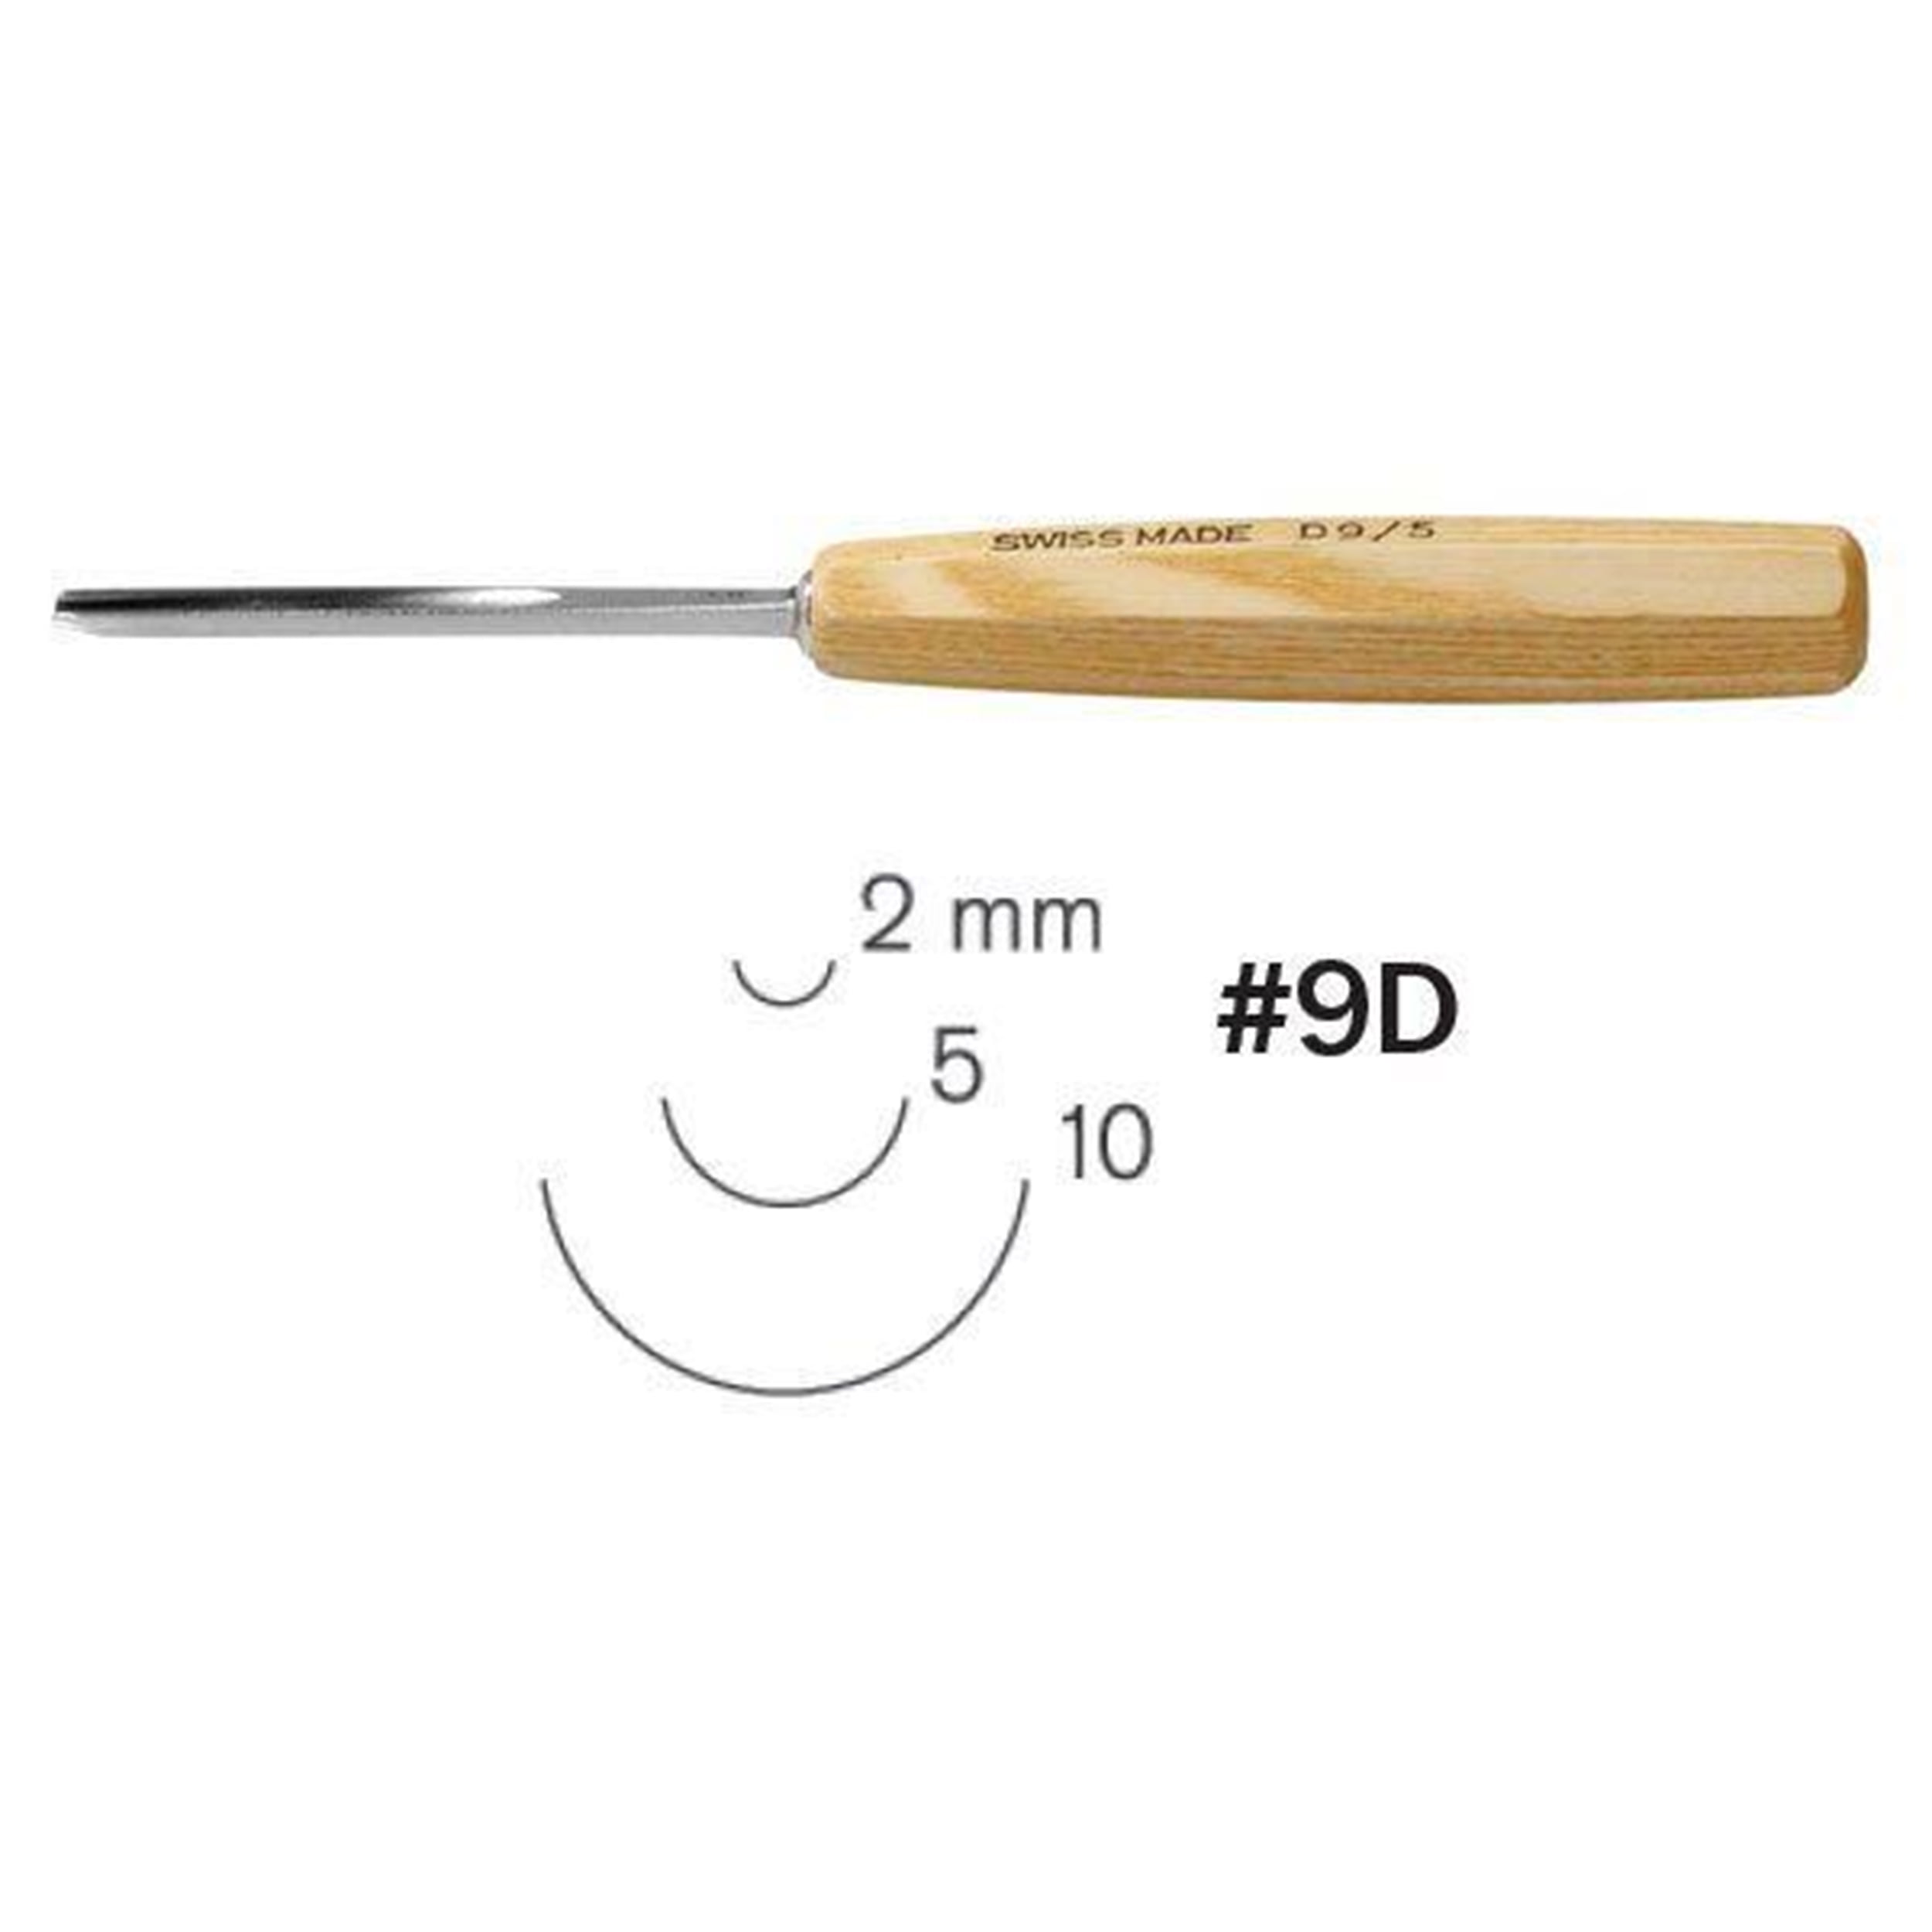 PFEIL SWISS MADE 2/35MM GOUGE CARVING TOOL-$10.95 to ship, extras ship $1.